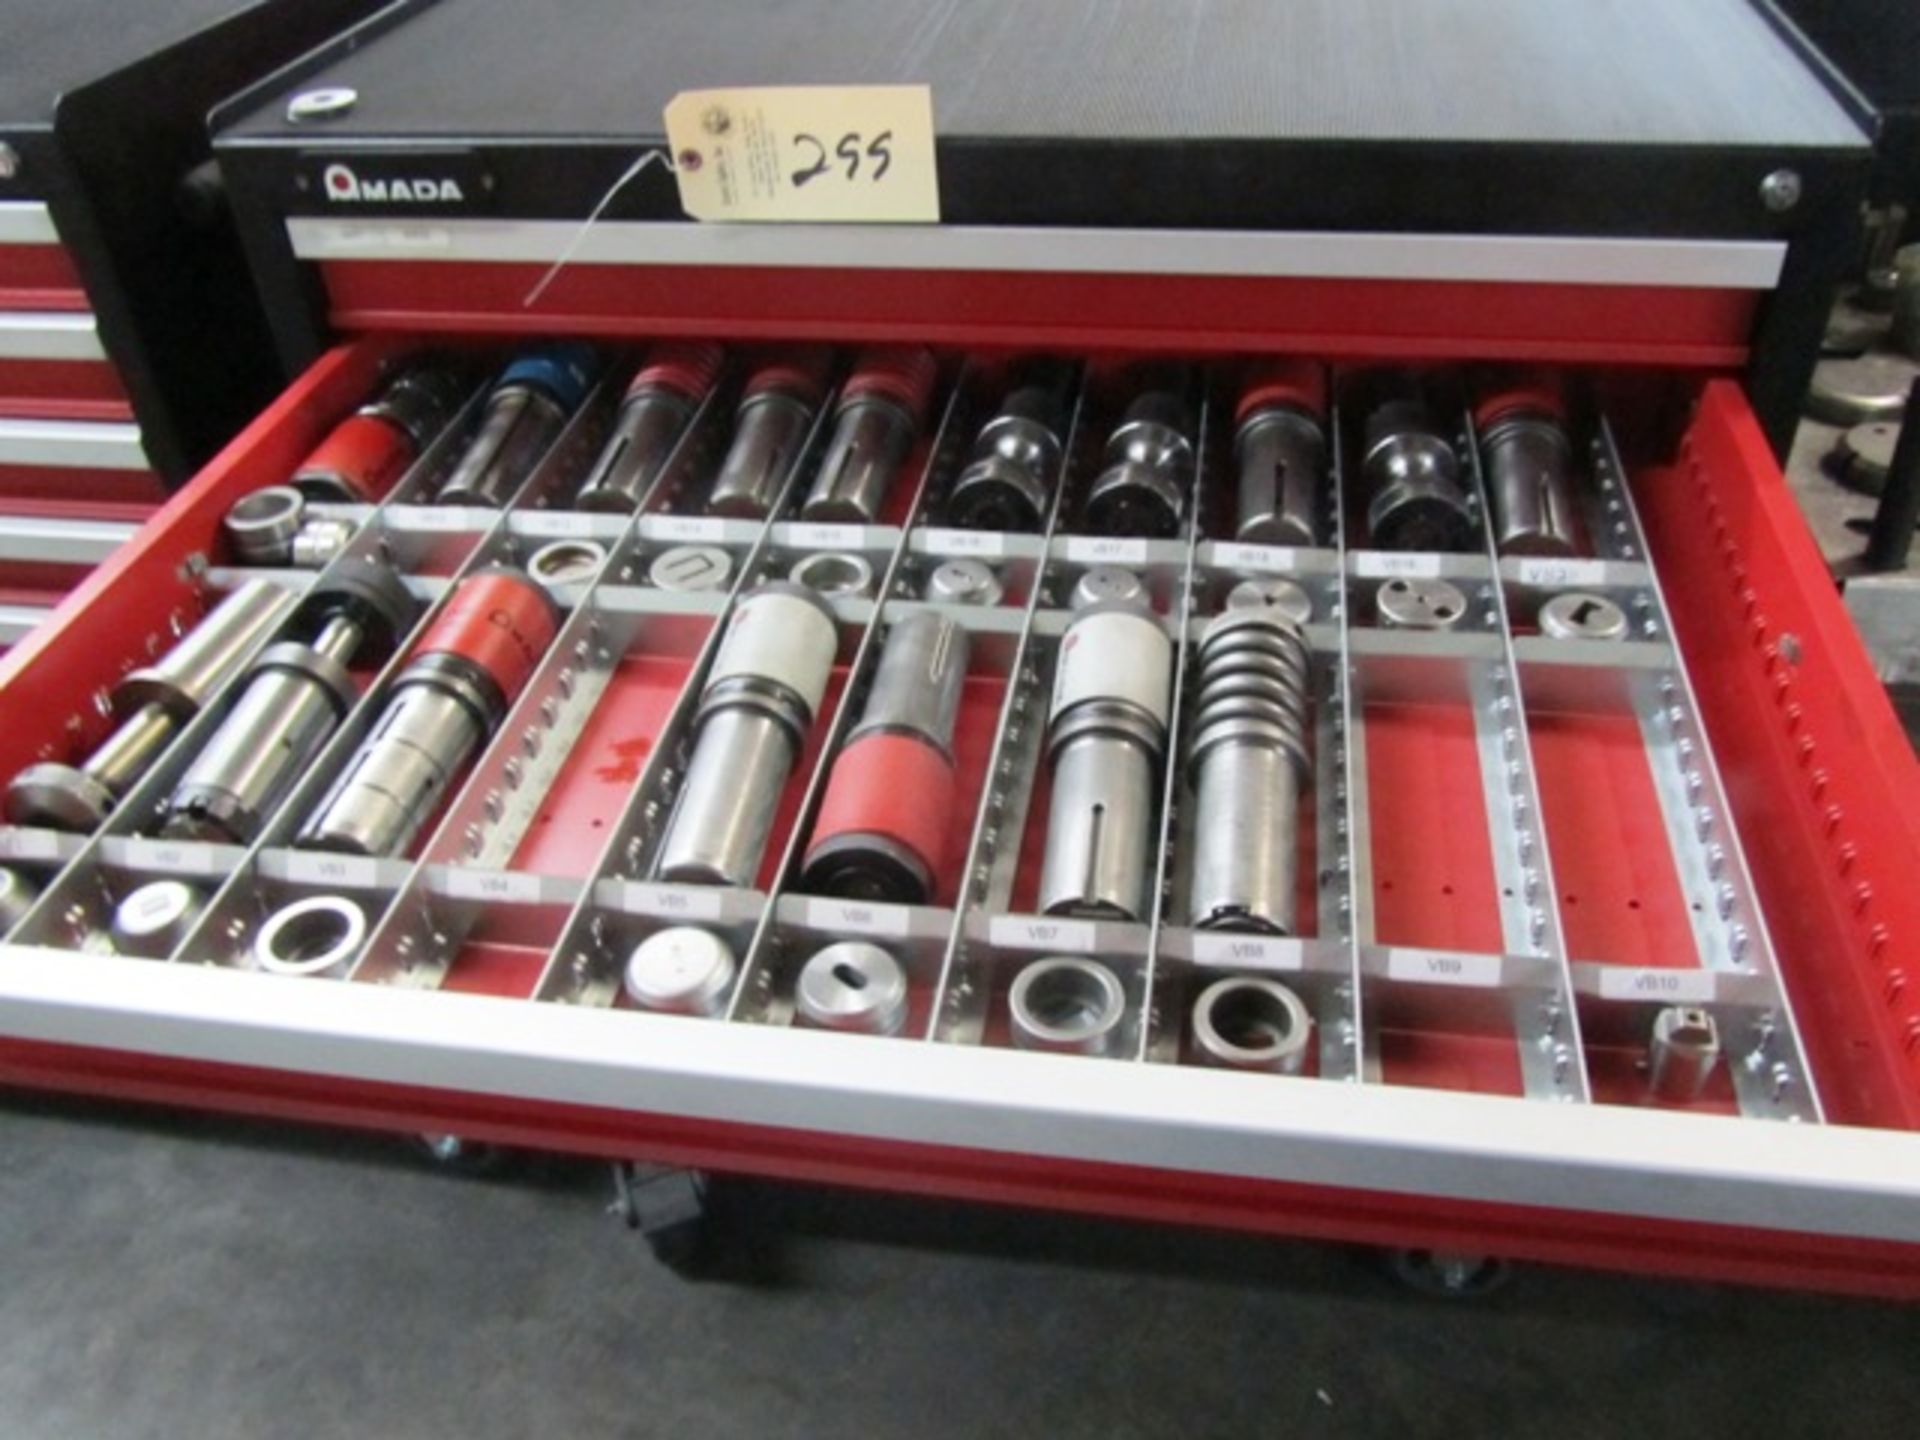 Amada 8 Drawer Portable Tool Cabinet with Turret Punches & Dies - Image 3 of 7